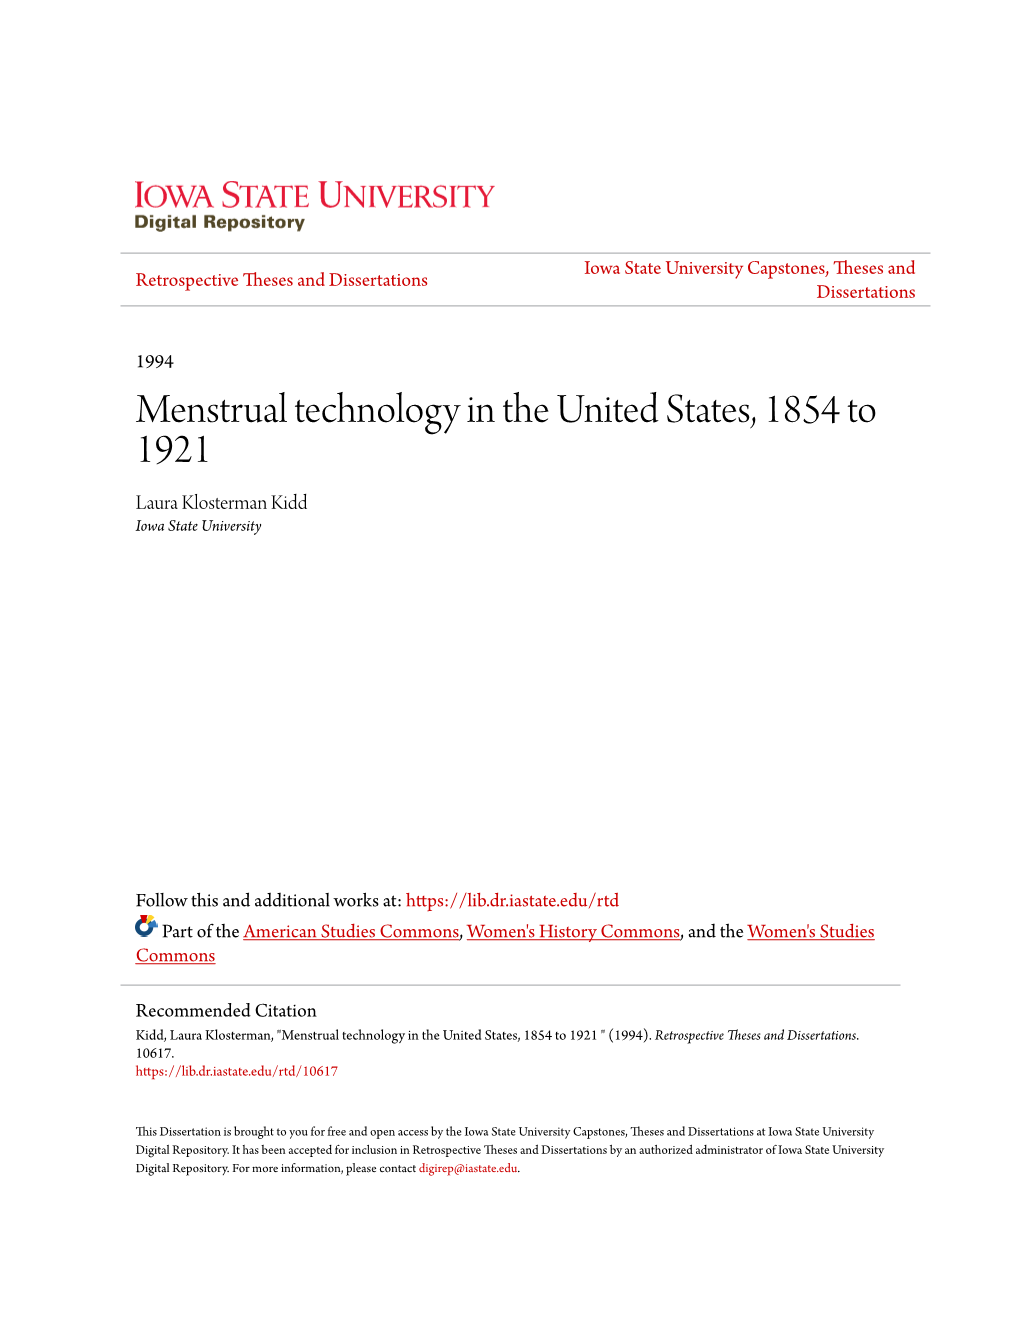 Menstrual Technology in the United States, 1854 to 1921 Laura Klosterman Kidd Iowa State University